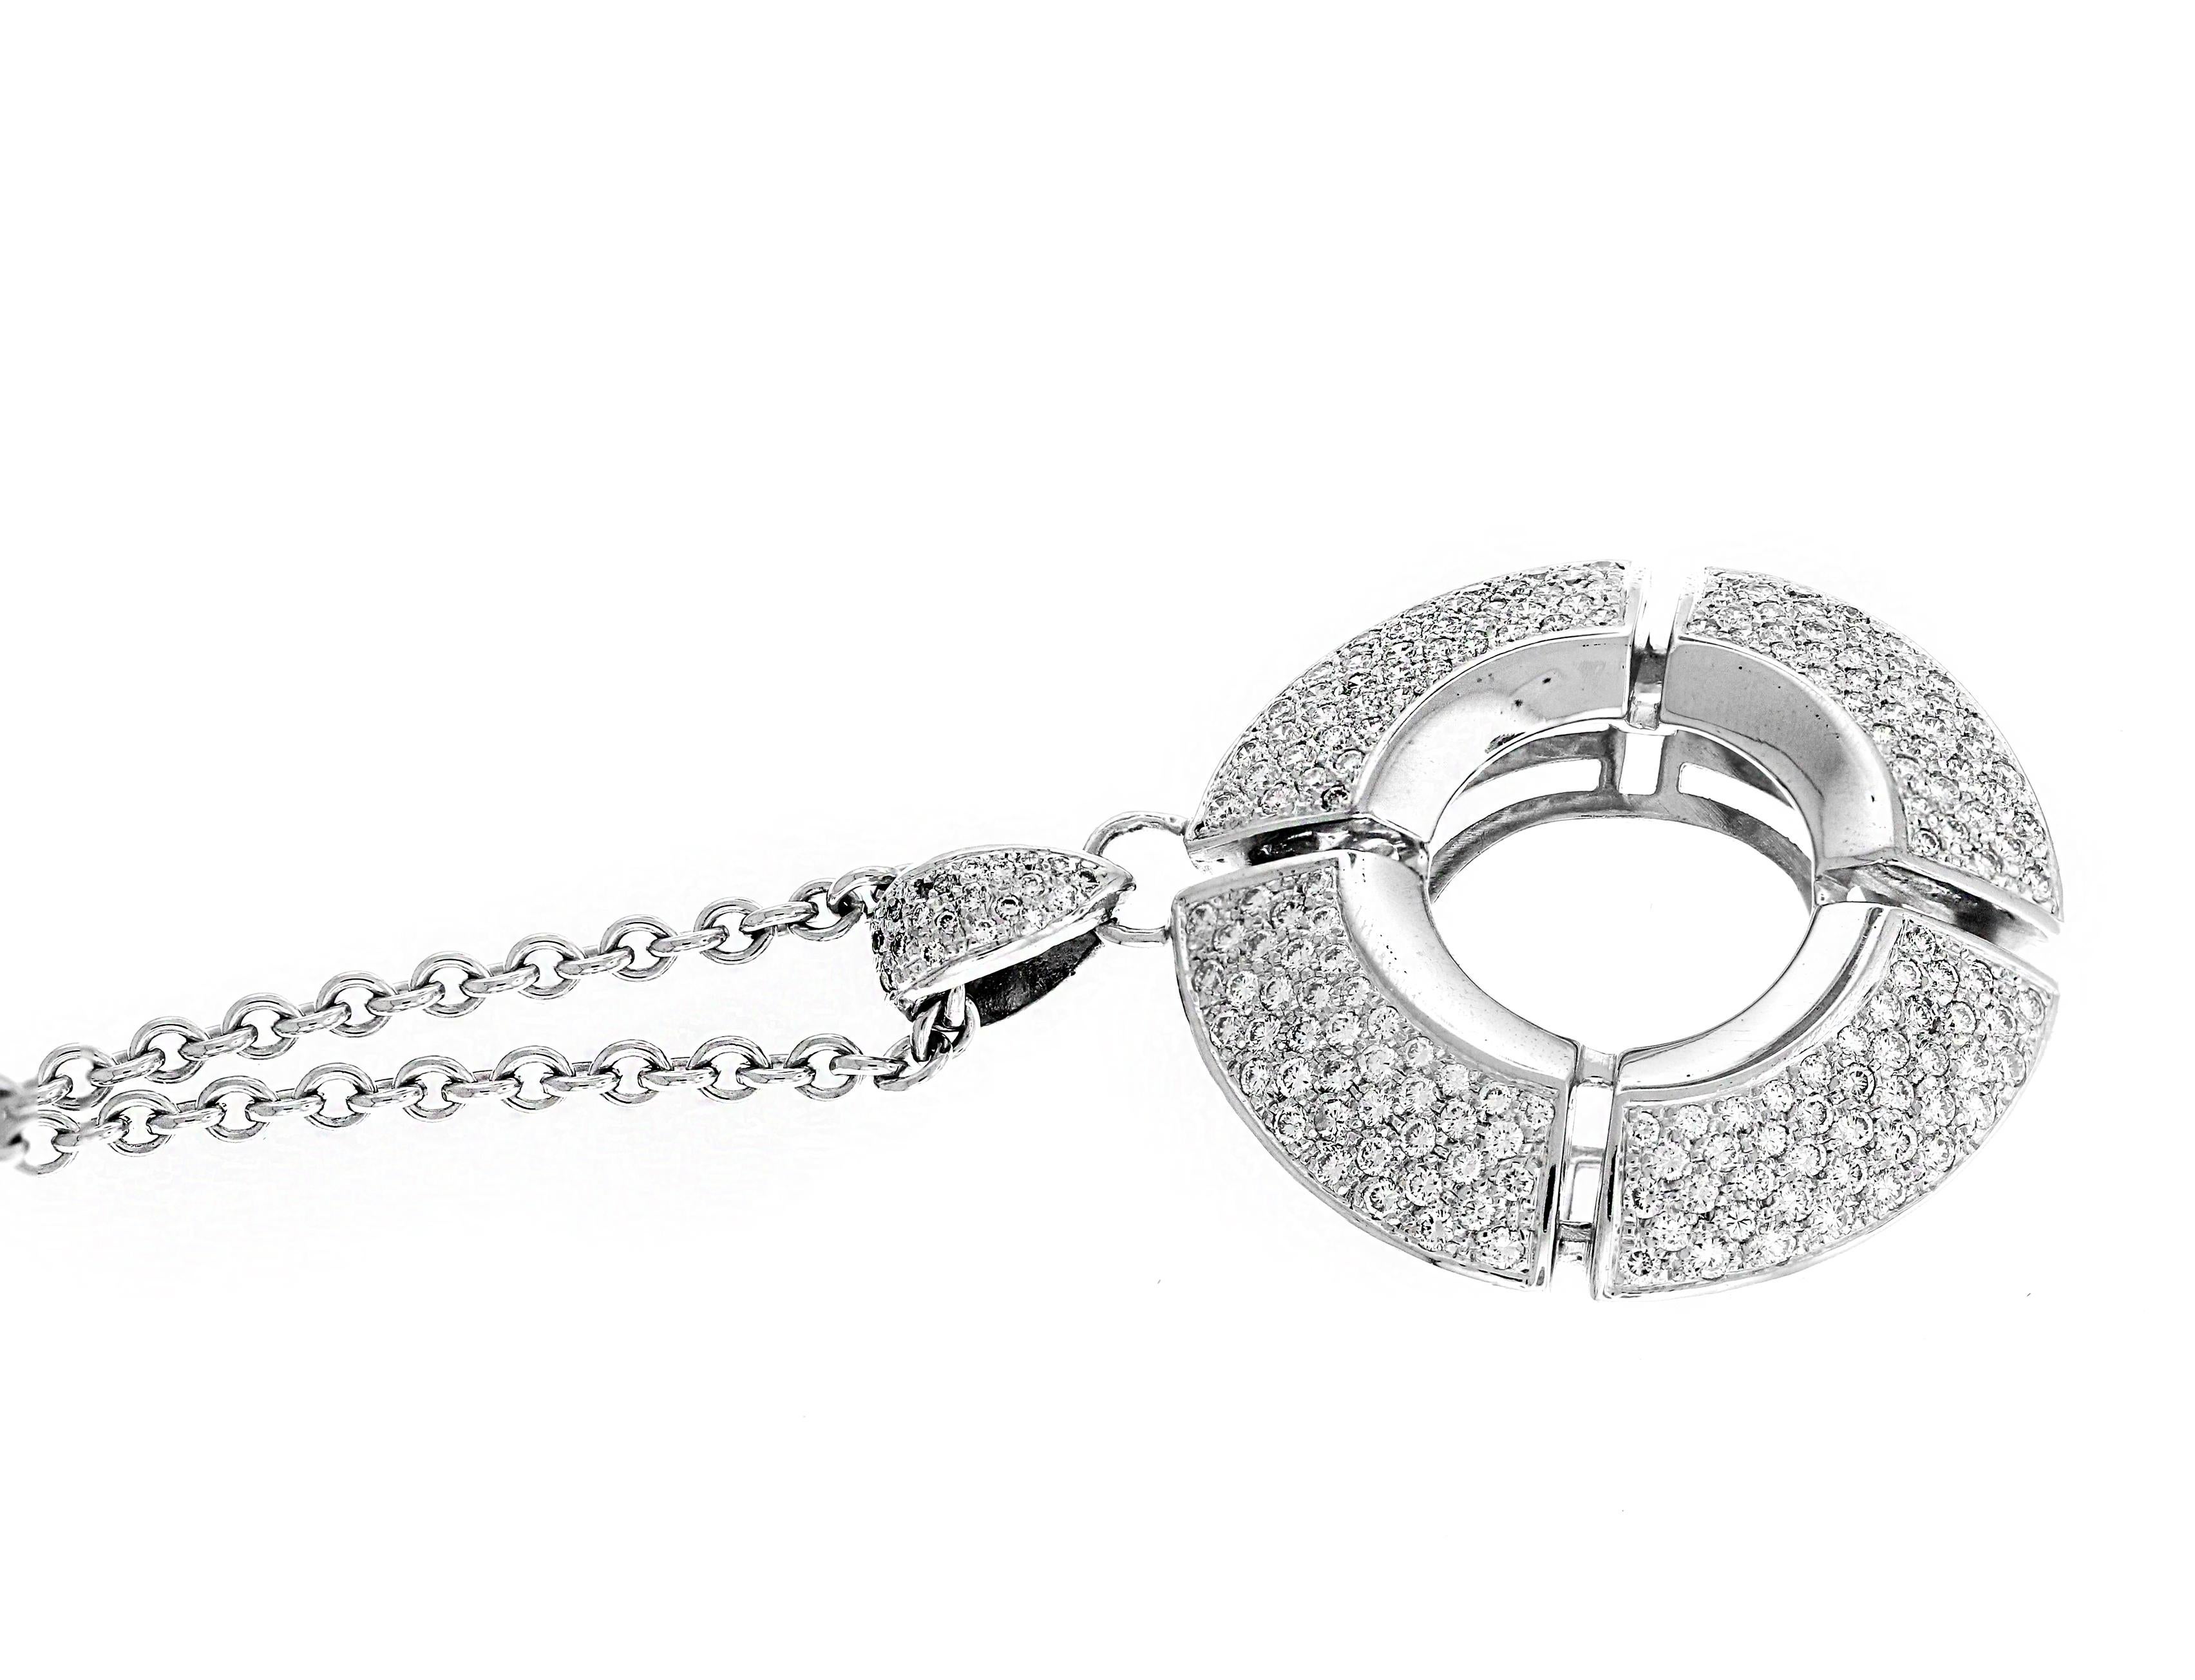 Platinum and Diamond Pendant with 18K White Gold Chain Necklace

Pendant is done in Platinum and has 4.78 carat G color, VS clarity diamonds
Pendant measures 2 inch x 1.5 inch

Chain is 18 inches in length

Made in Italy by designer, Antonini
